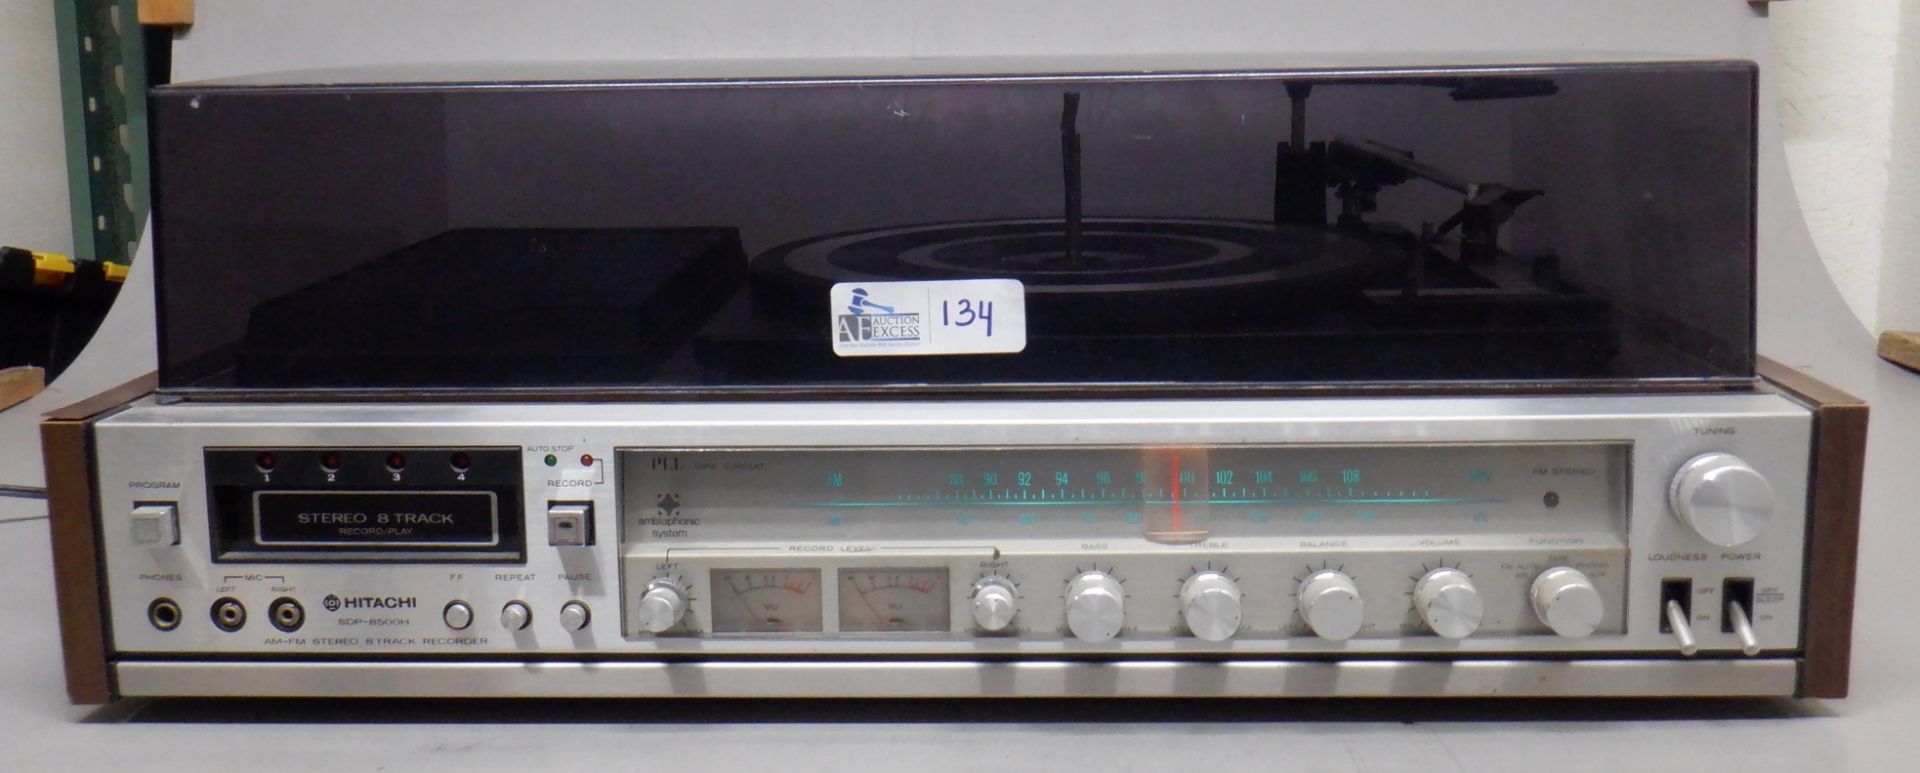 HITACHI SDP-8500H TURNTABLE SYSTEM - Image 3 of 4